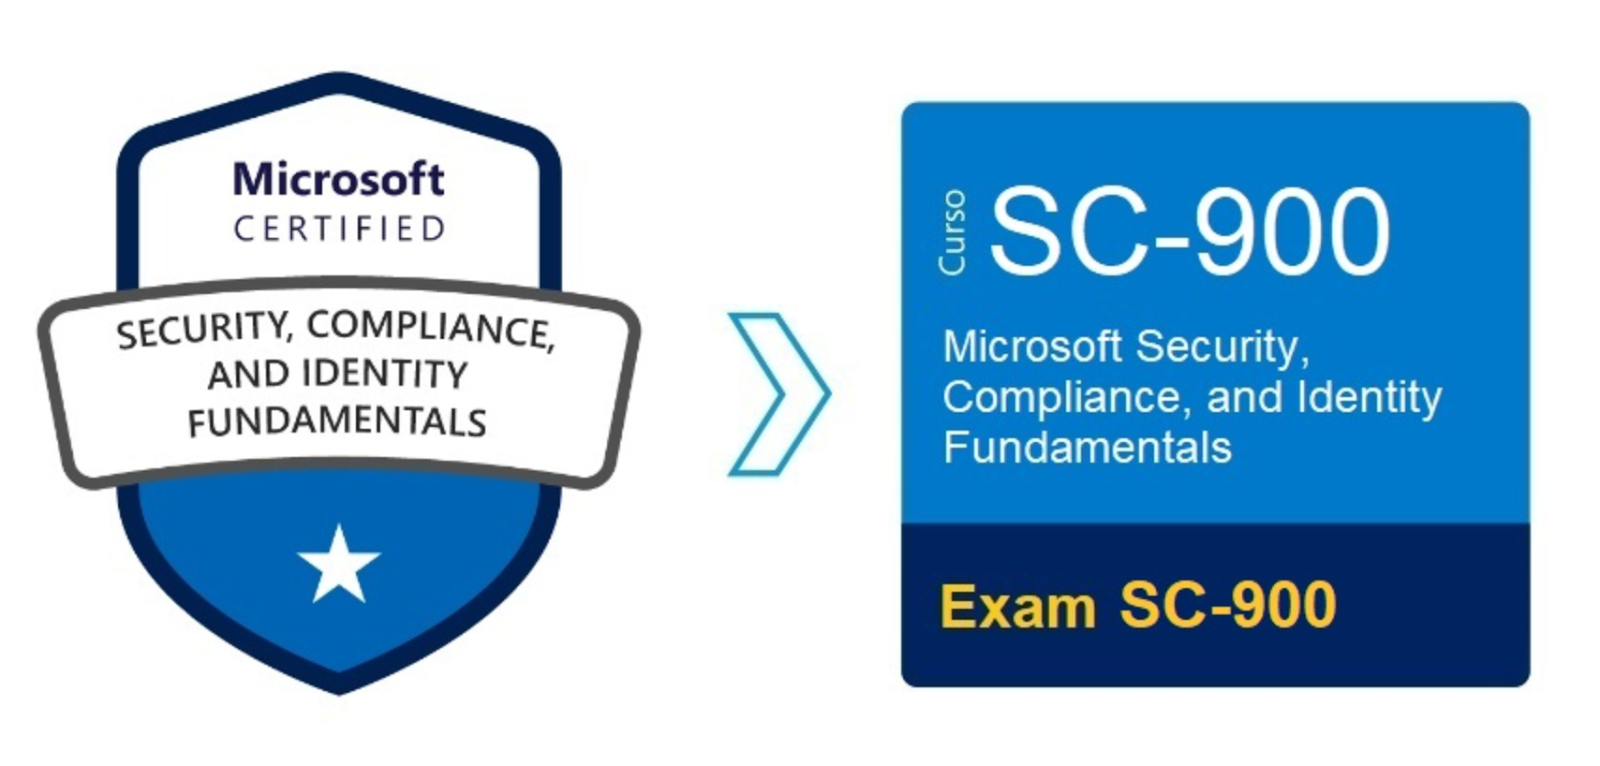 How to Ace the SC-900: Microsoft Security, Compliance, and Identity Fundamentals Exam